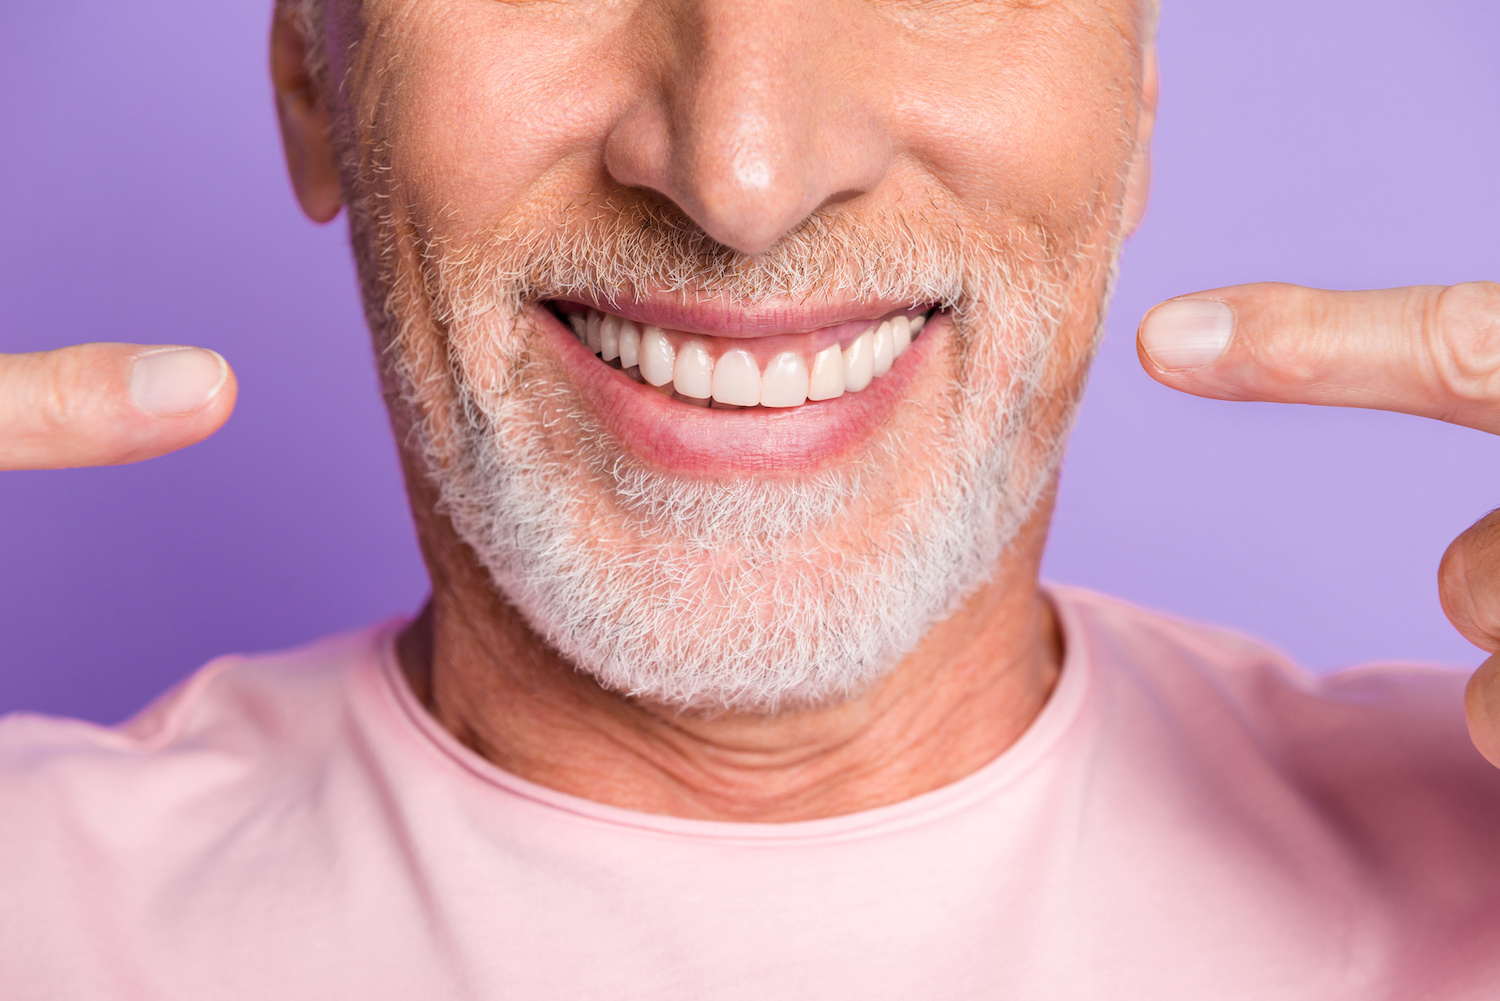 How Often Should I See a Dentist in Coral Gables?